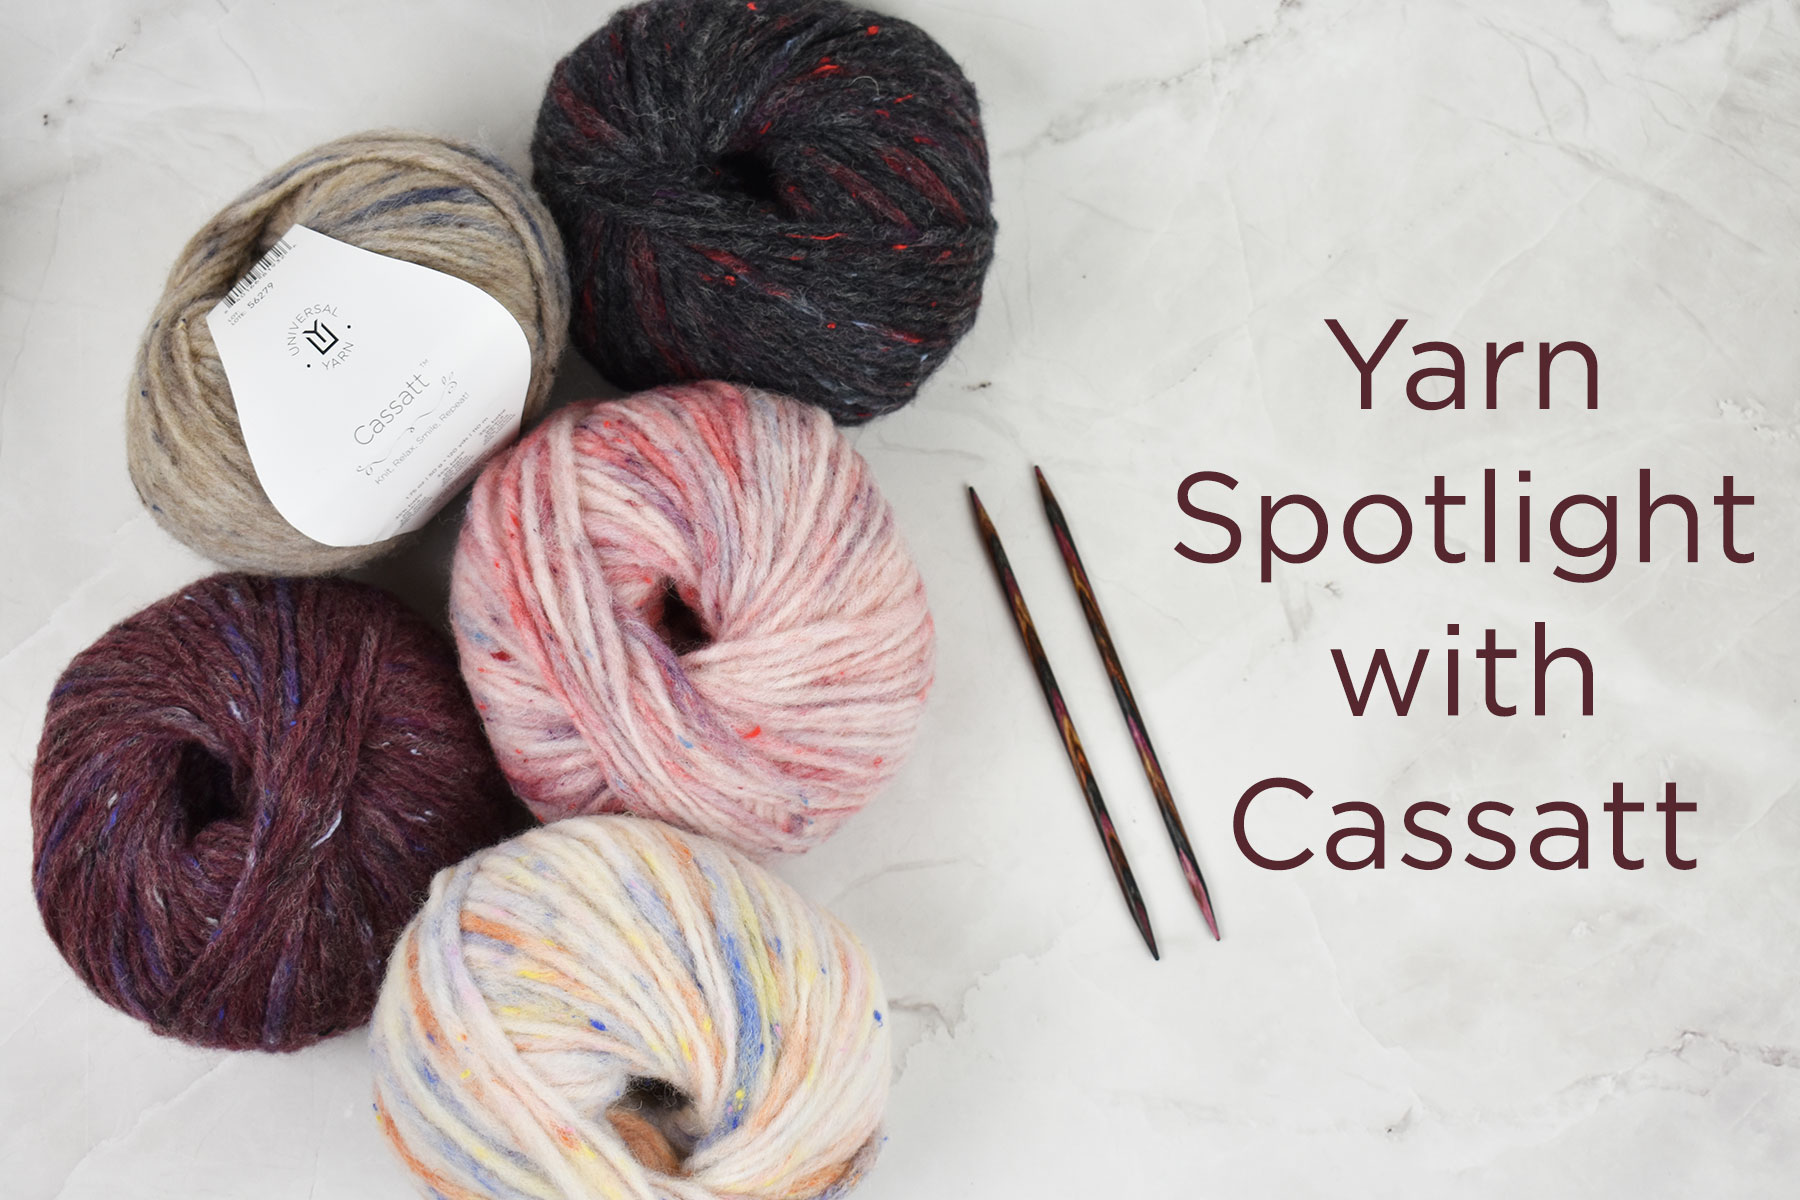 5 balls of yarn called Cassatt are arranged to showcase their color and texture. Knitting needles are placed next to them with text reading "Yarn Spotlight with Cassatt."